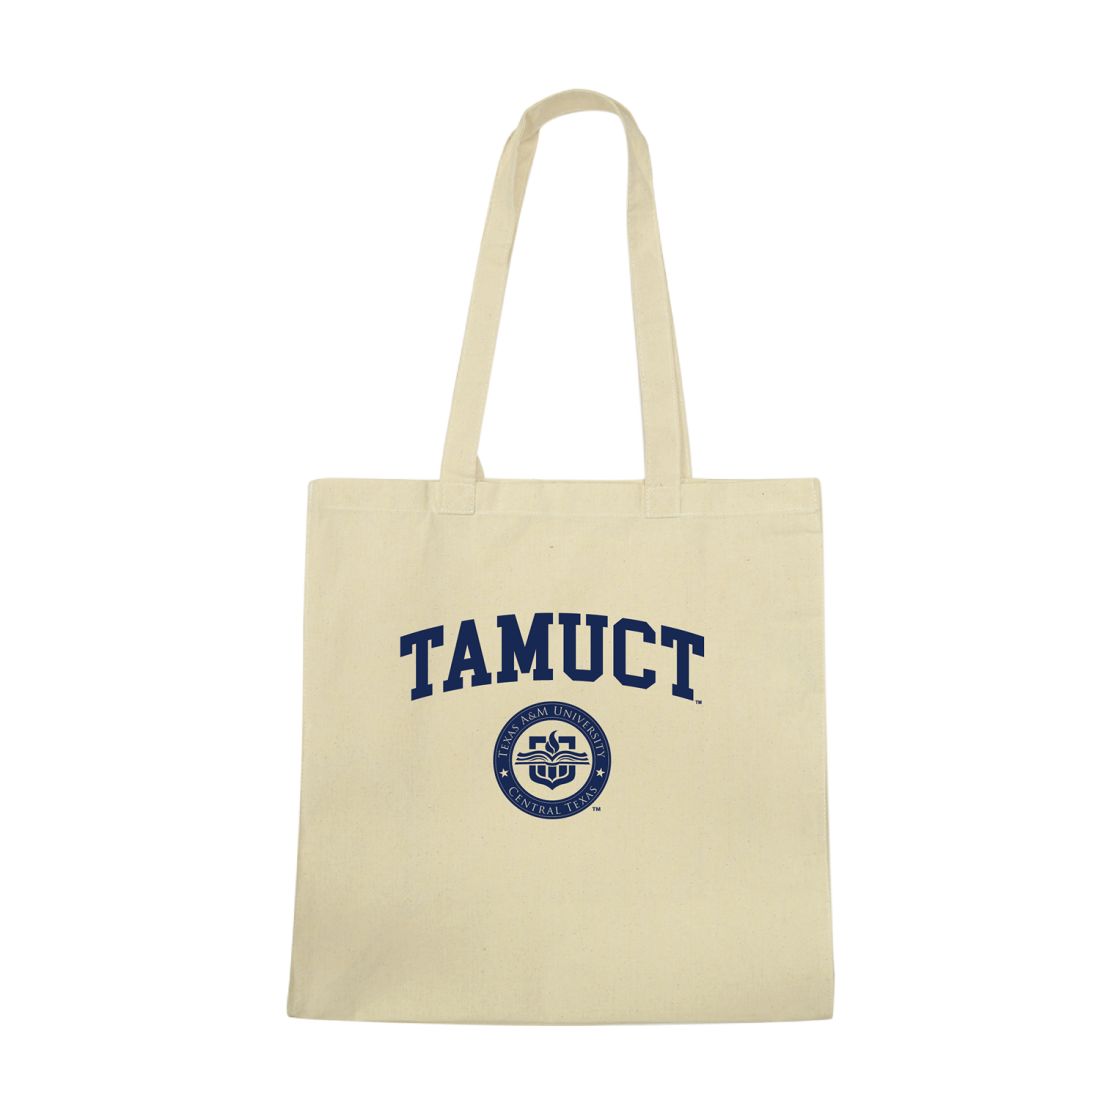 Texas A&M University-Central Texas Warriors Institutional Seal Tote Bag